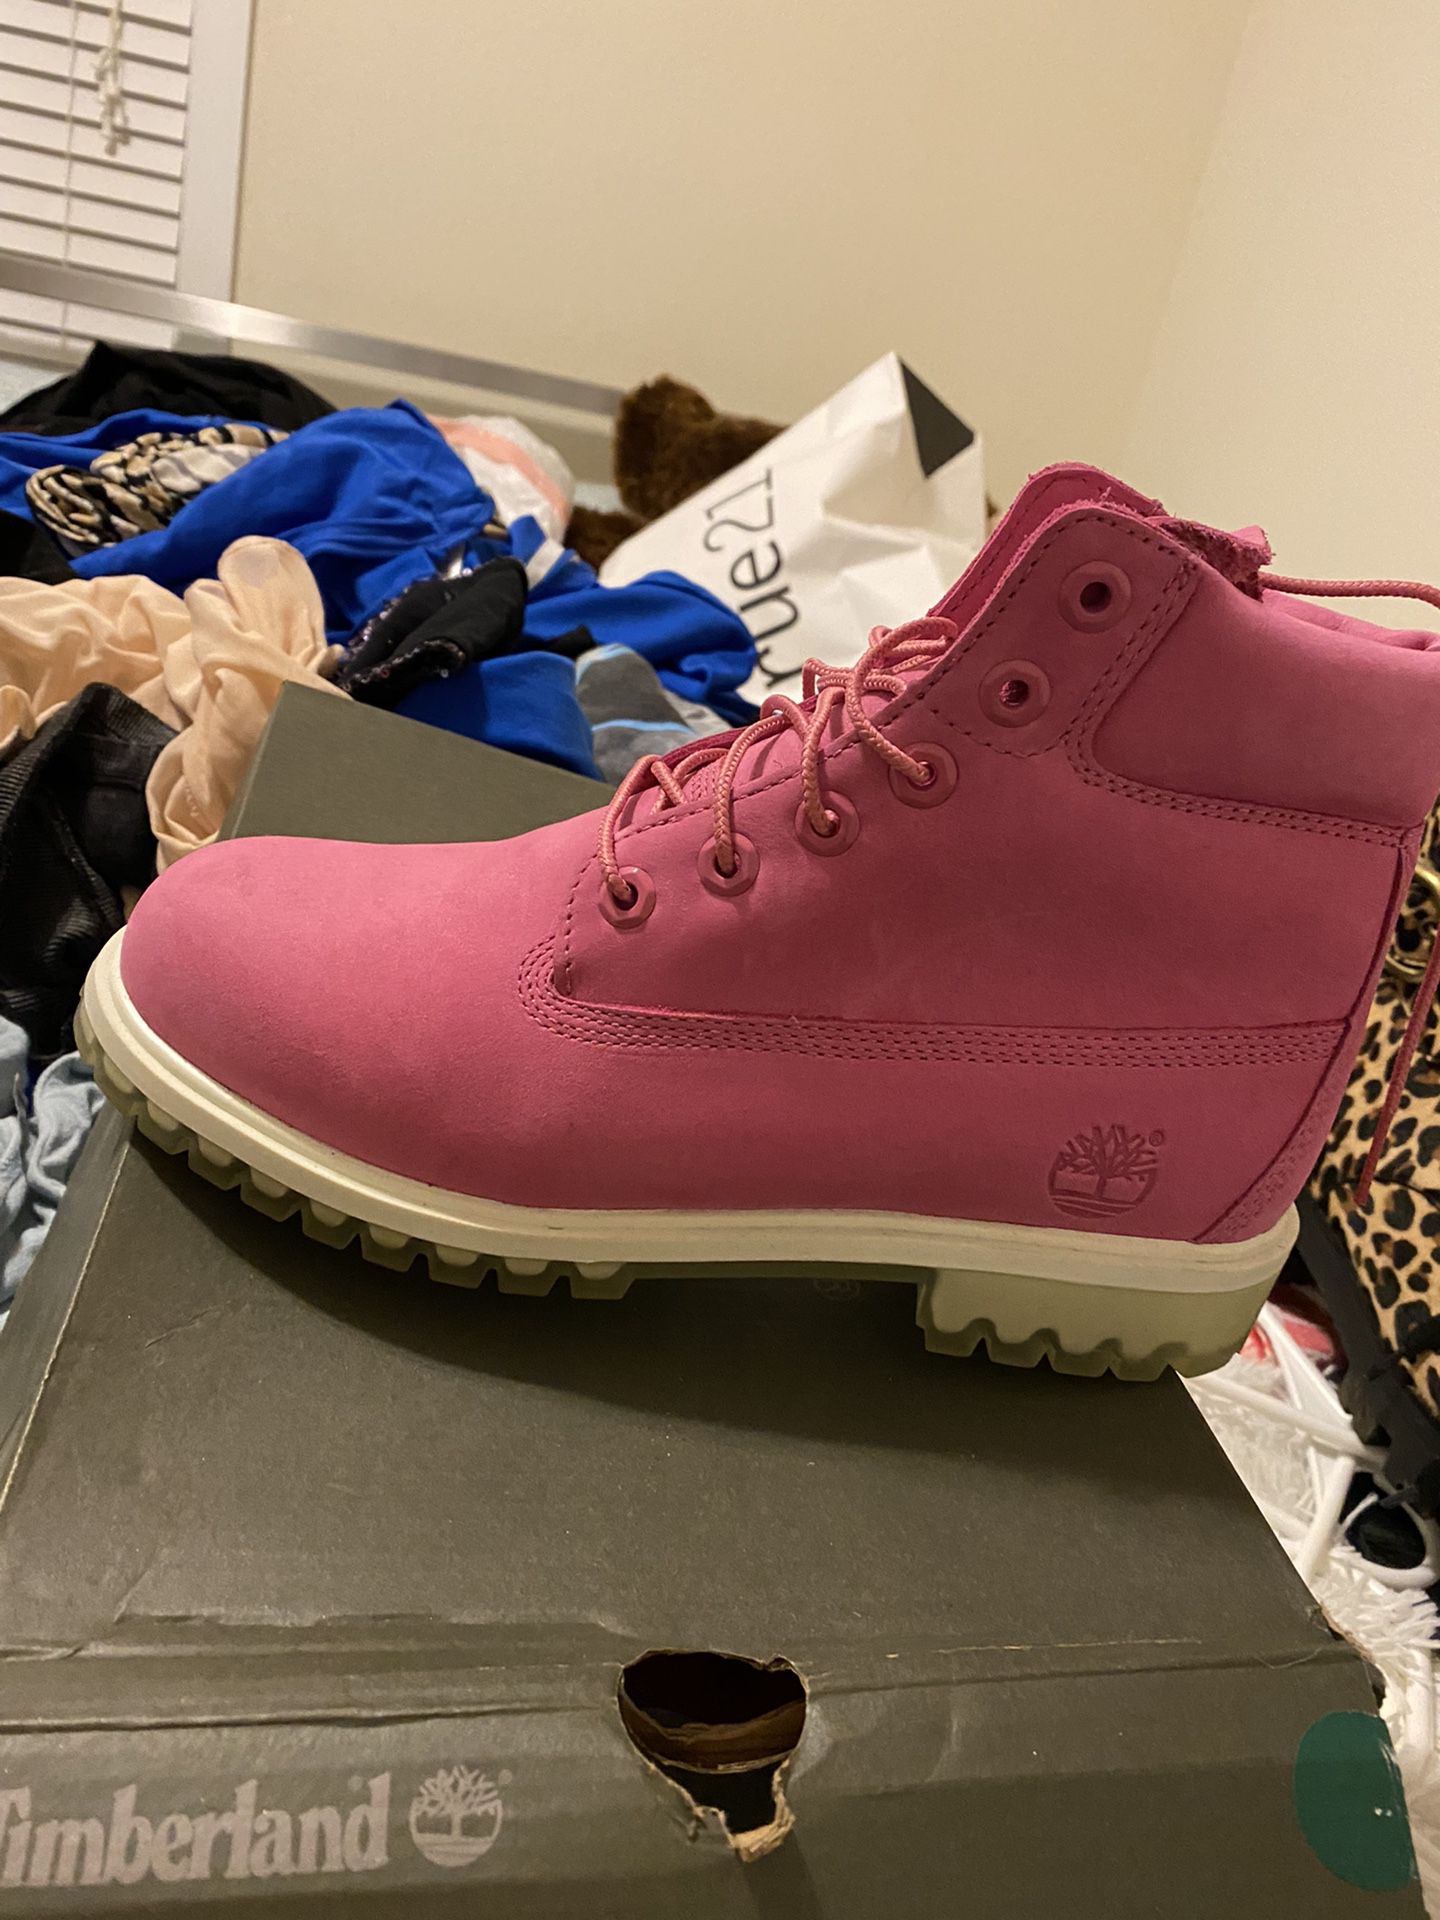 Woman’s Boots Brand New 